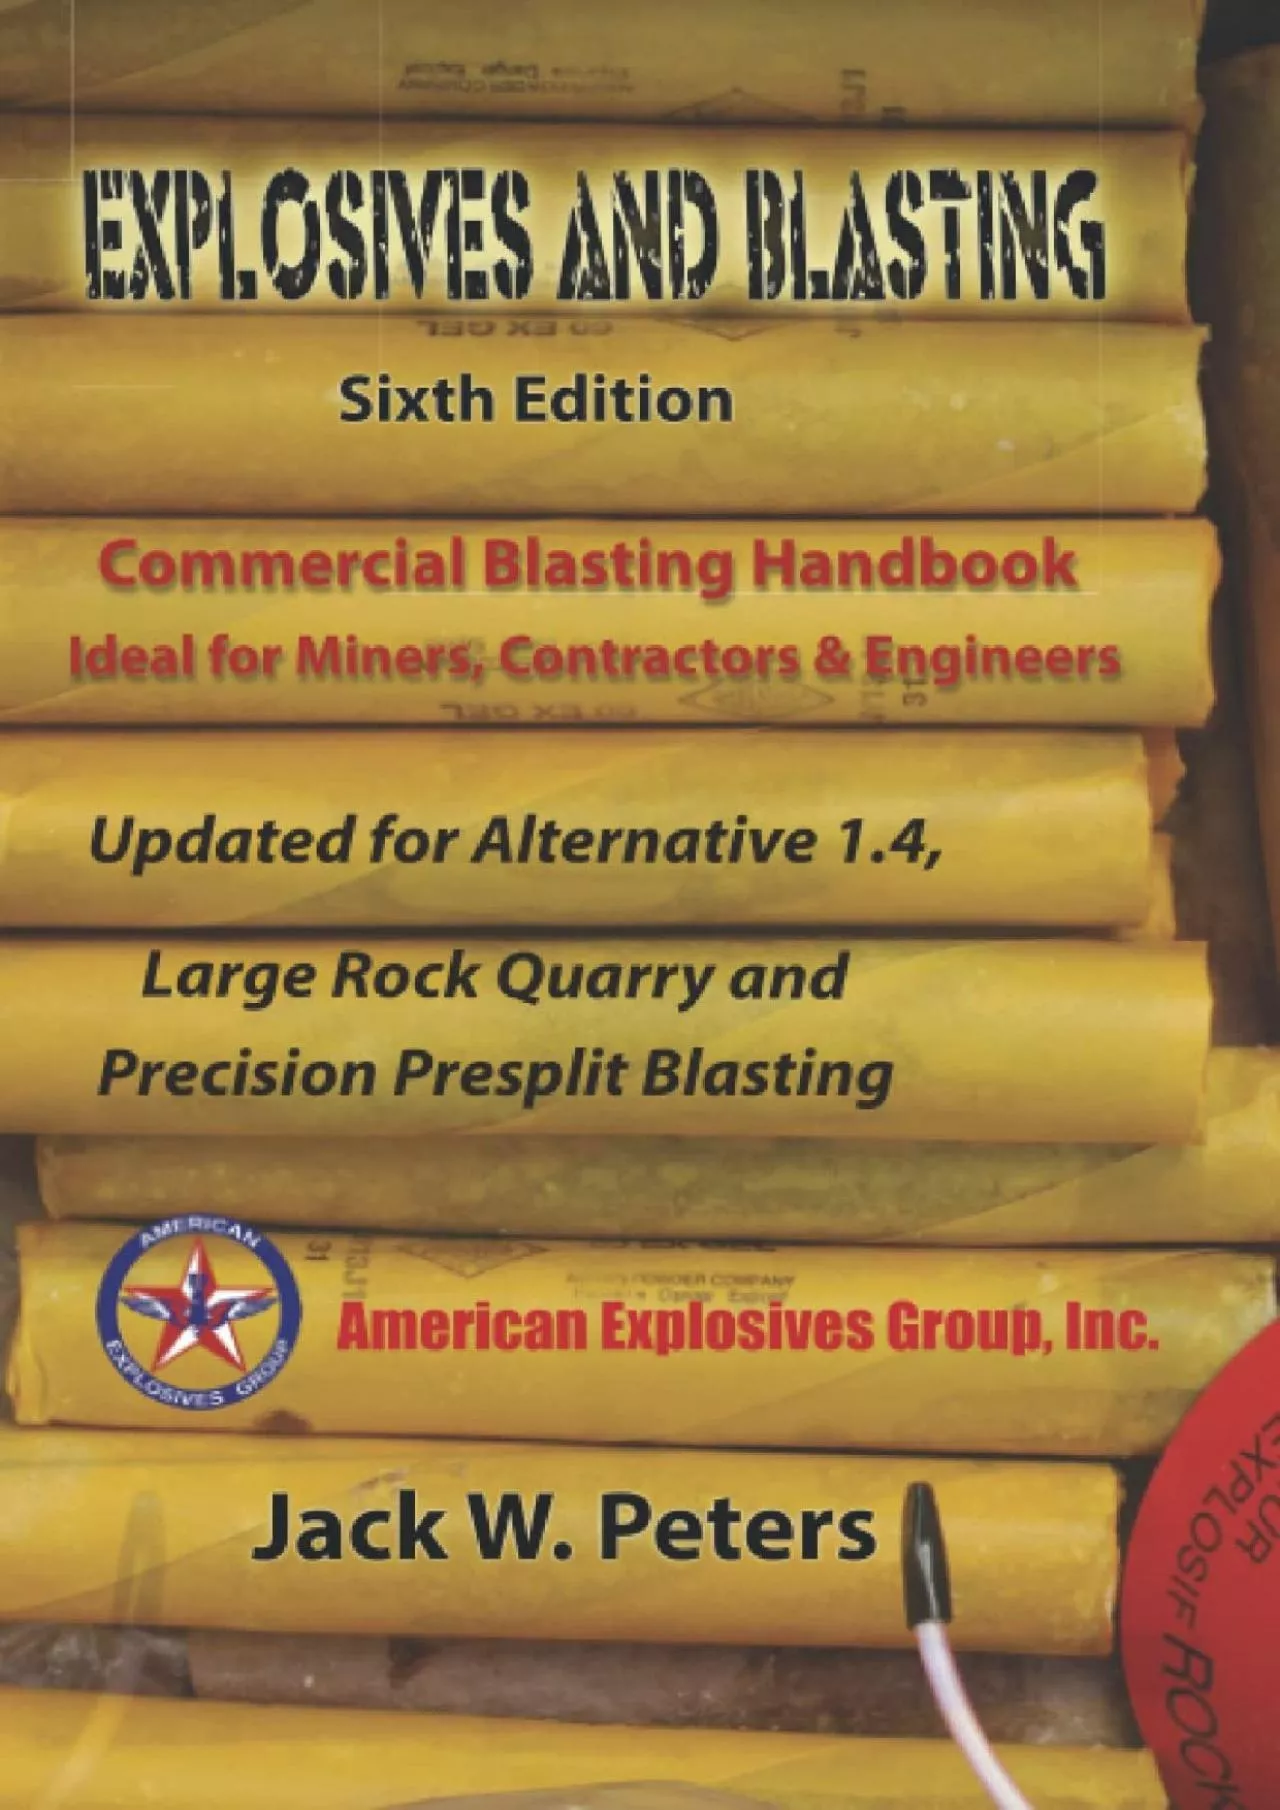 [EBOOK] Explosives and Blasting: Commercial Blasting Handbook, Ideal for Miners, Contractors